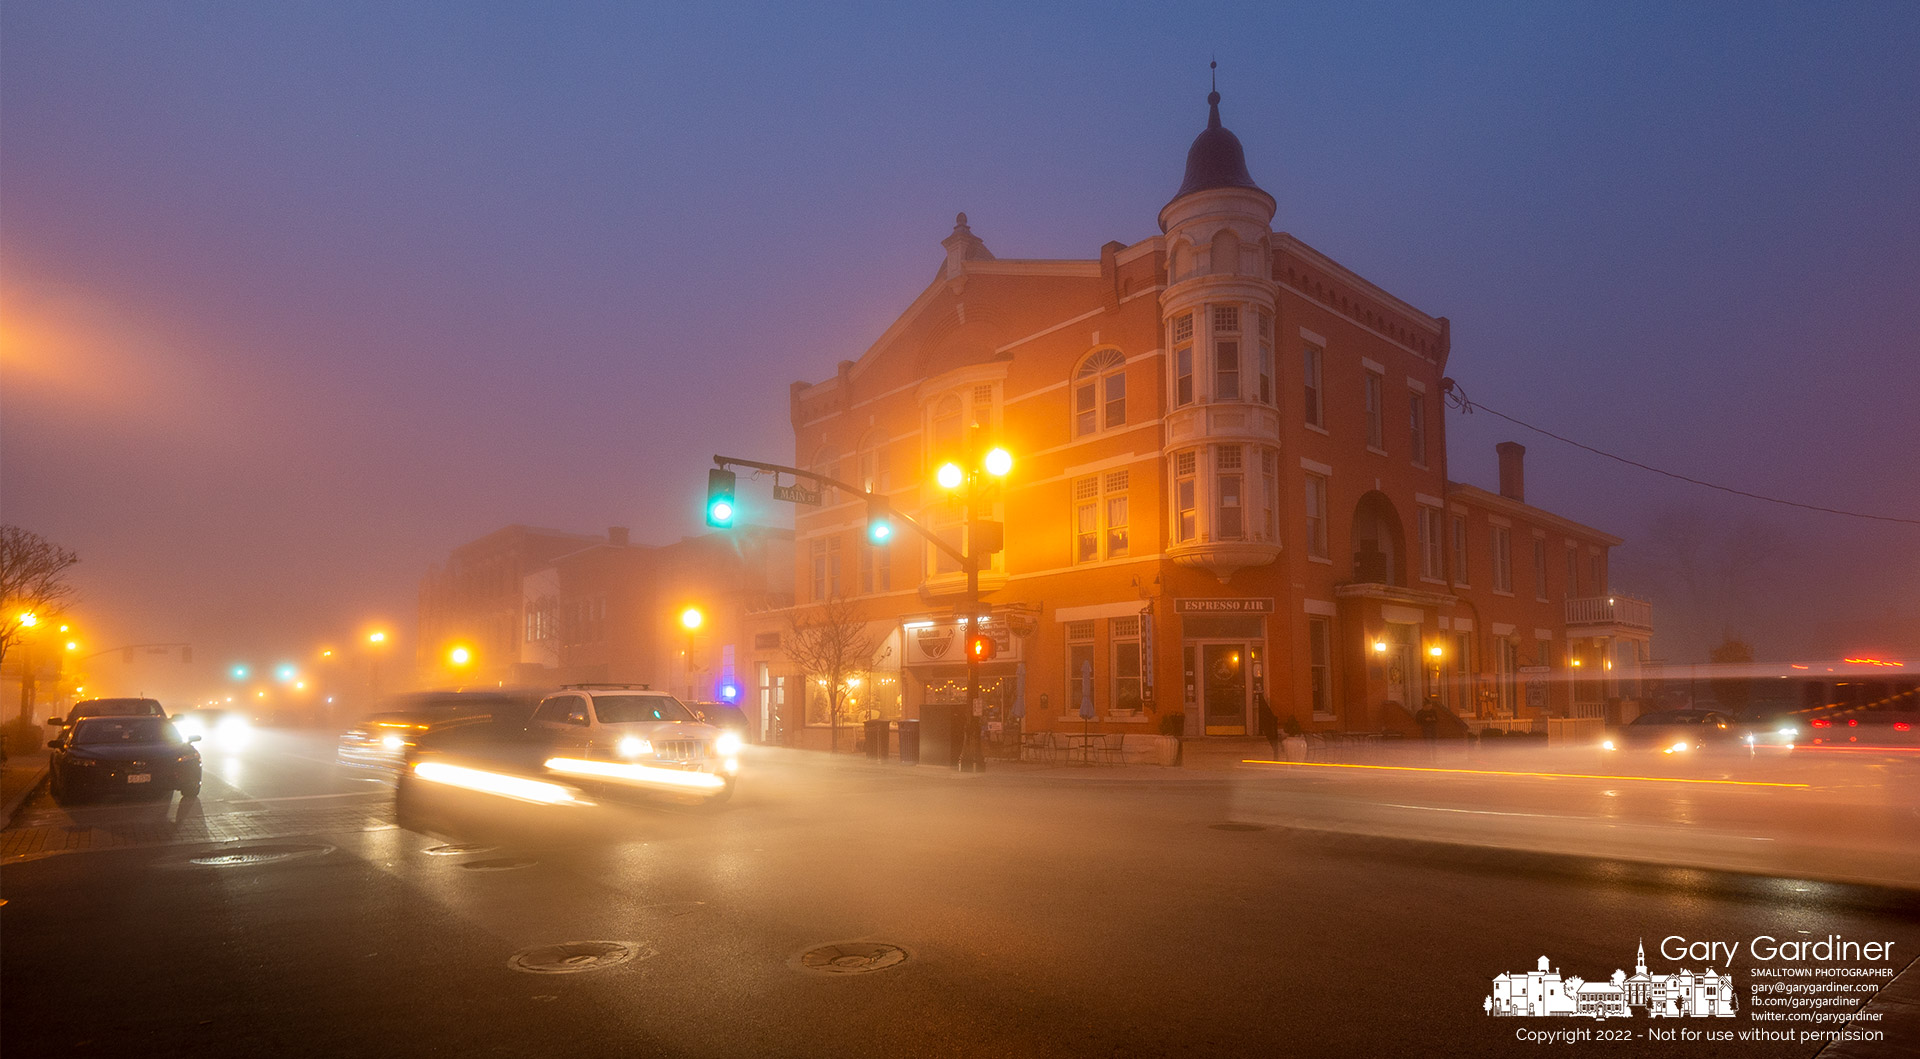 Drivers move through State and Main in fog-shrouded Uptown Westerville before sunrise Wednesday. My Final Photo for Nov. 2, 2022.